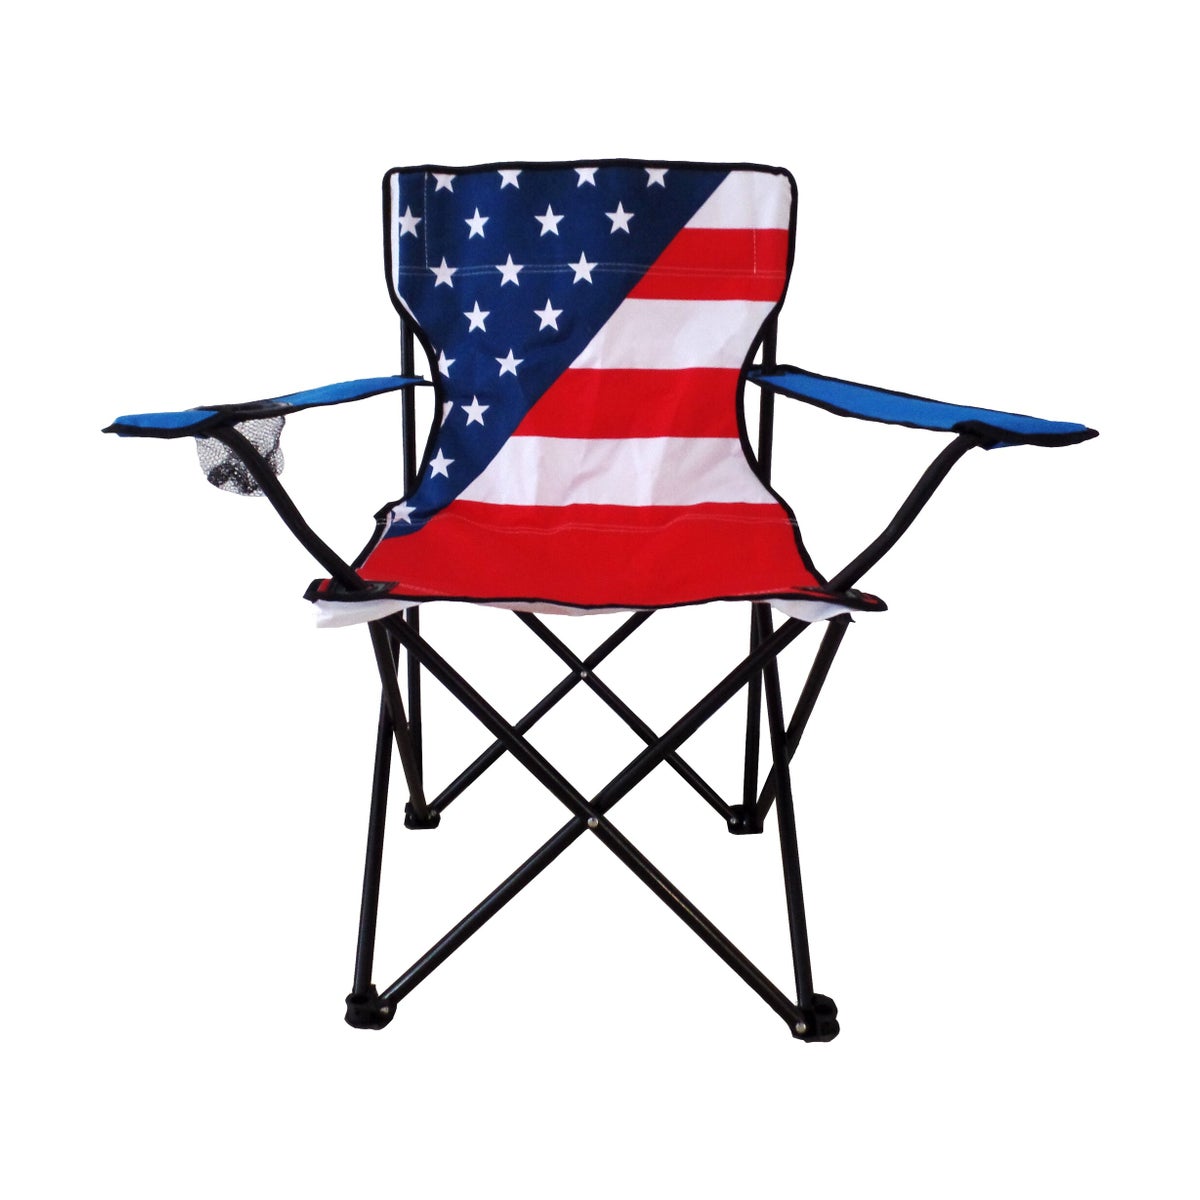 USA - Large Camping Chair (6)